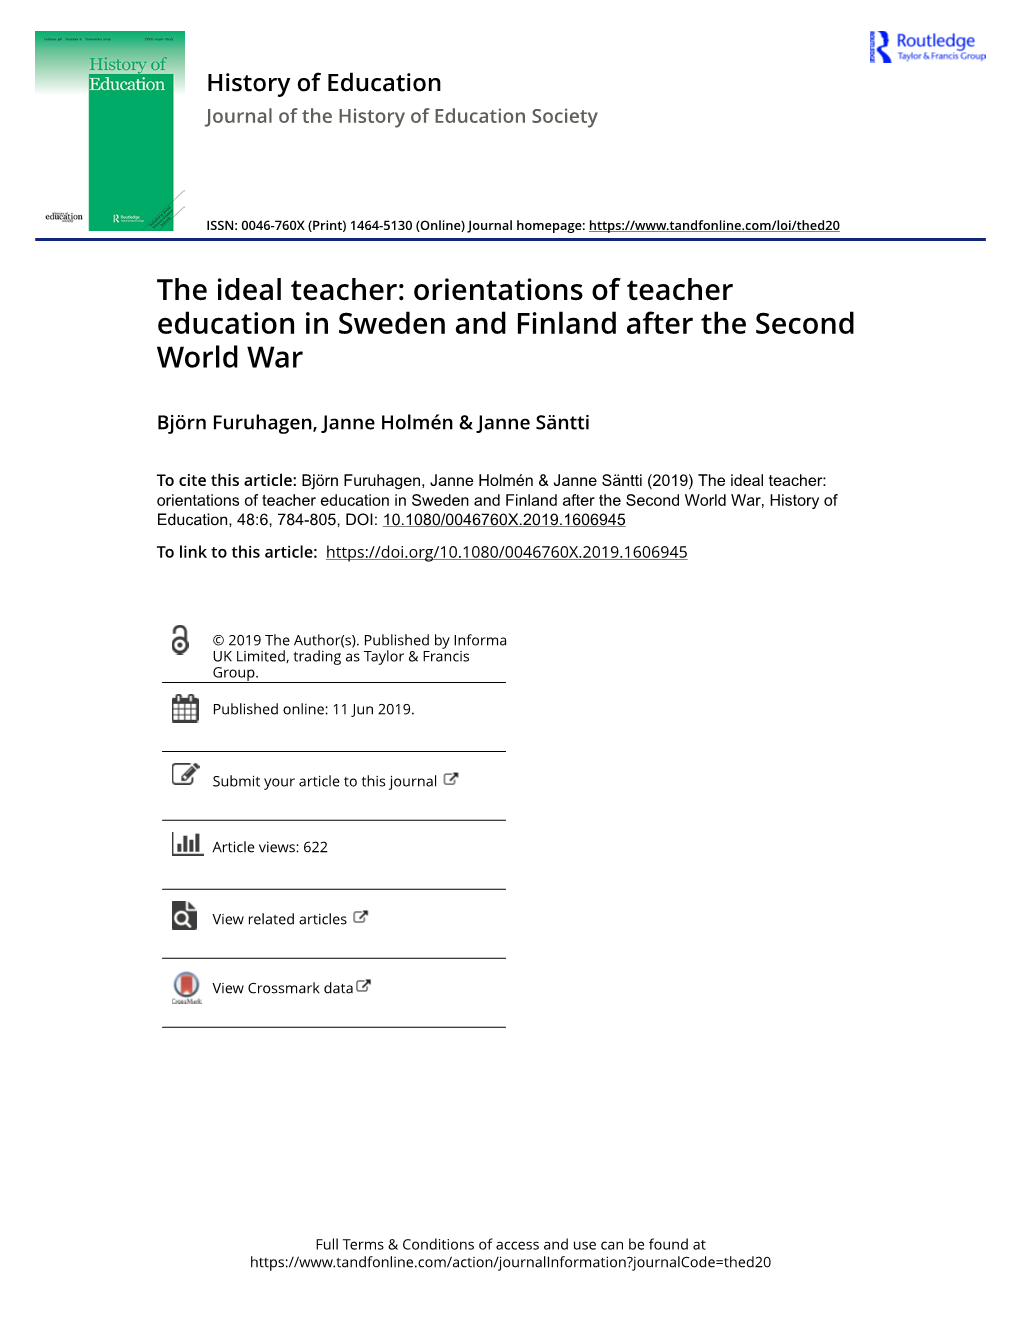 Orientations of Teacher Education in Sweden and Finland After the Second World War